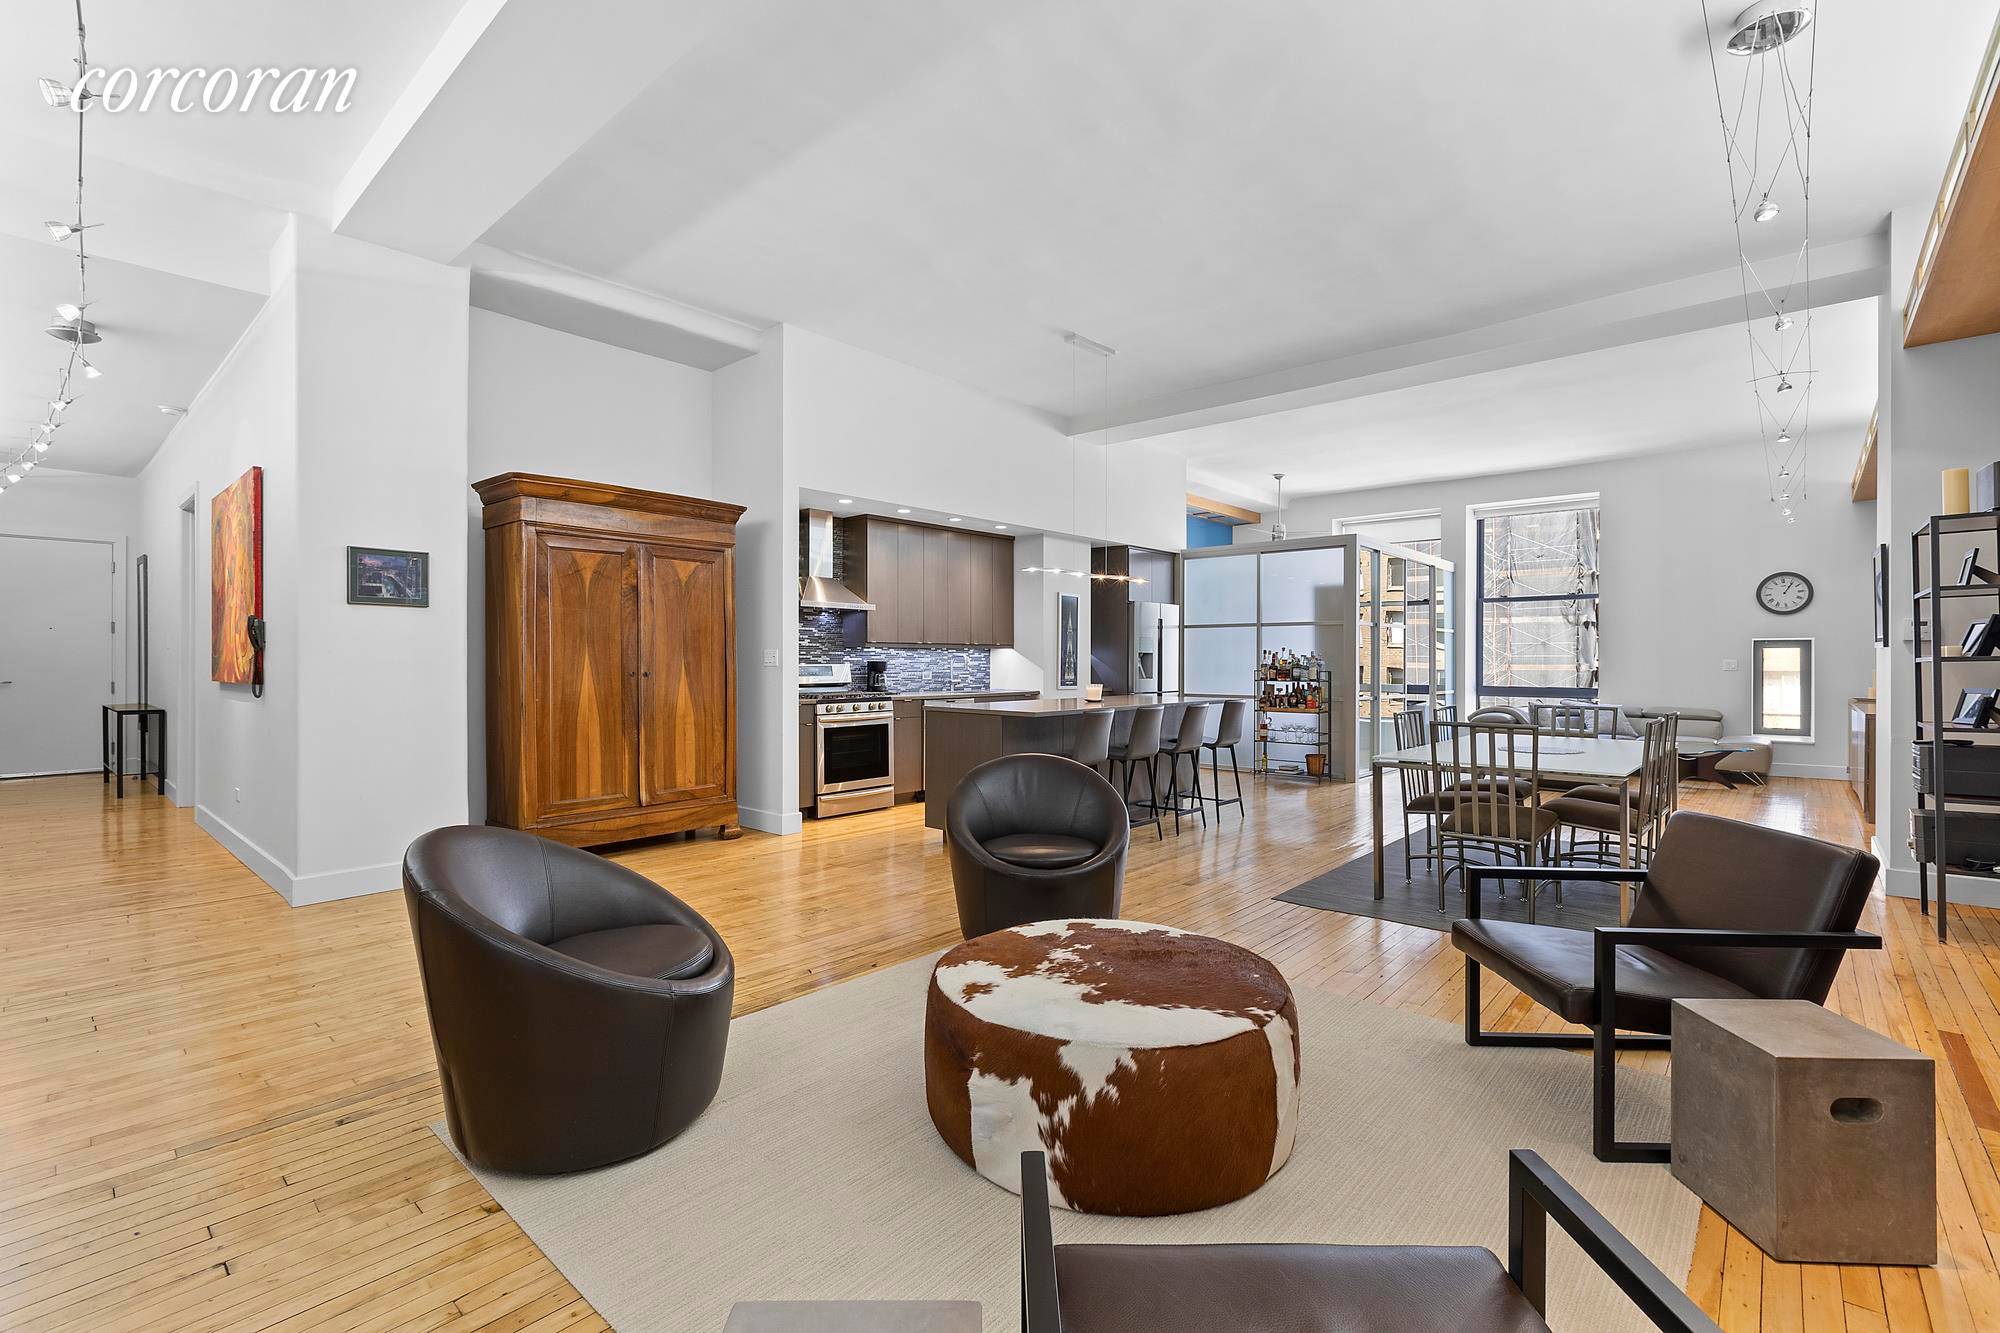 Application PendingWelcome to Apartment 5B at The Greenwich a true pre war loft with soaring 12ft ceilings that also happens to be in one of the most sought after luxury ...